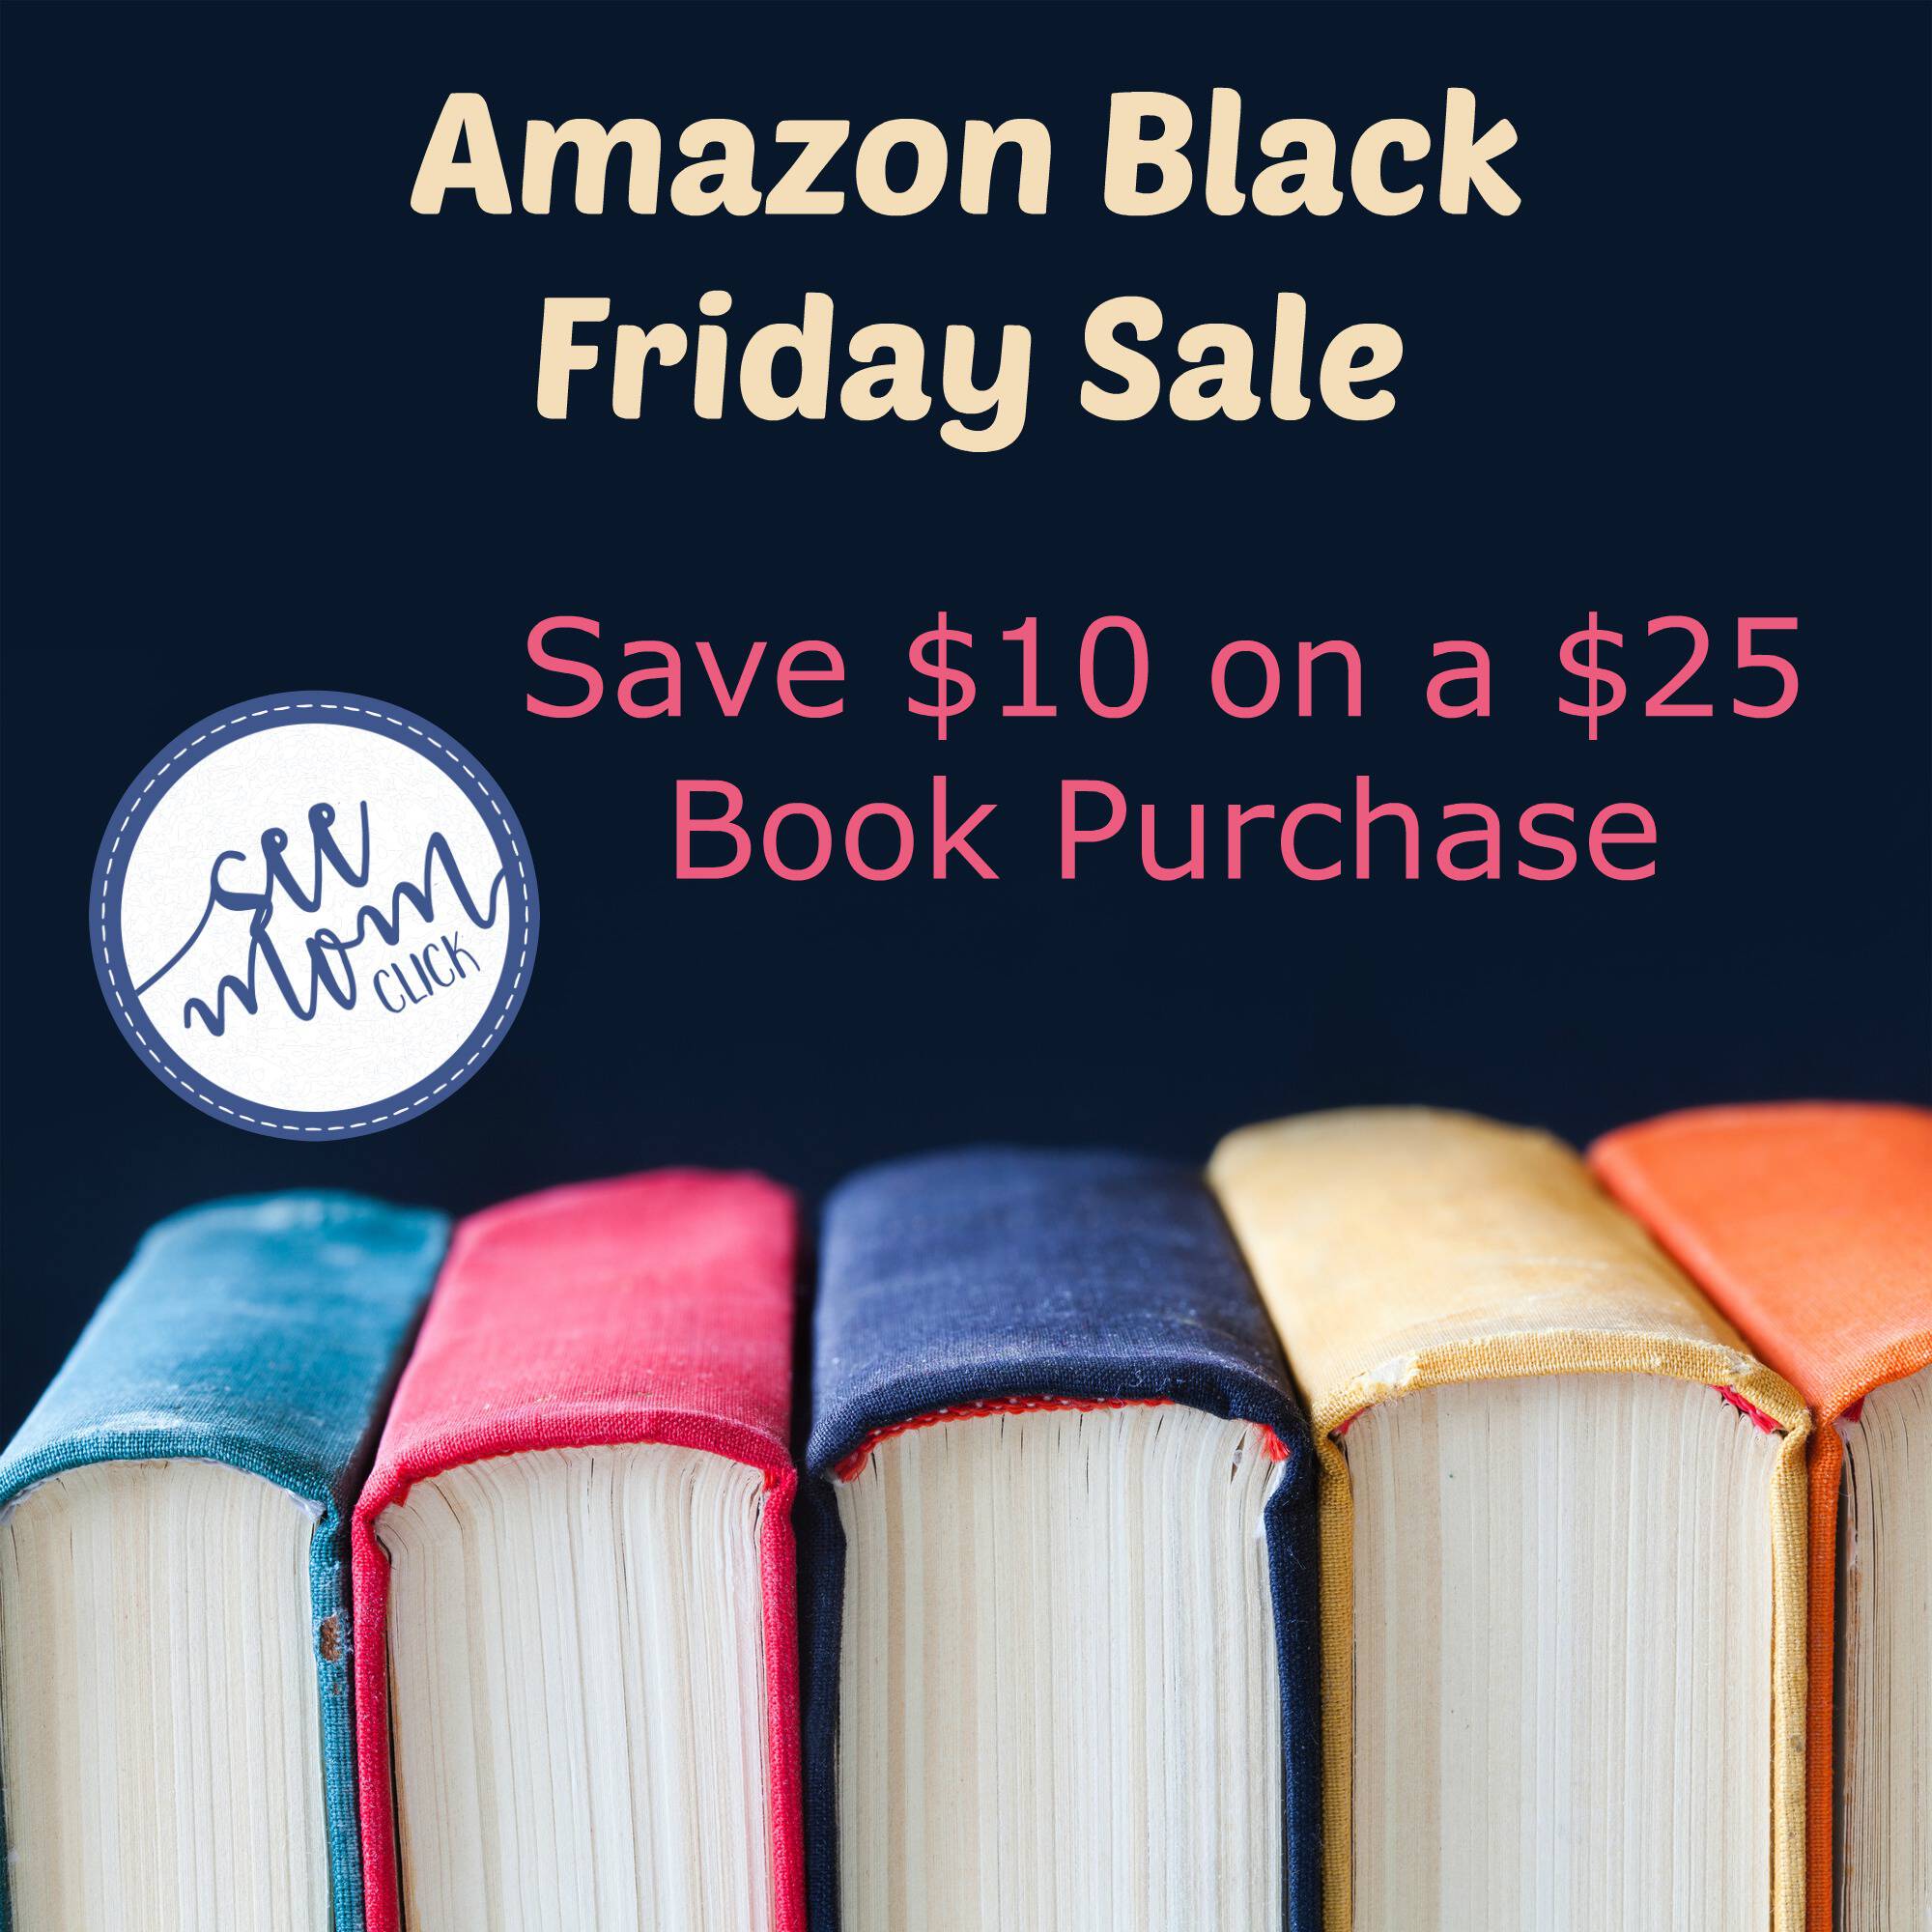 Bookworms, check out this fantastic deal on books! Save $10 on $25 in books on Amazon. Grab some great new reads for the new year!